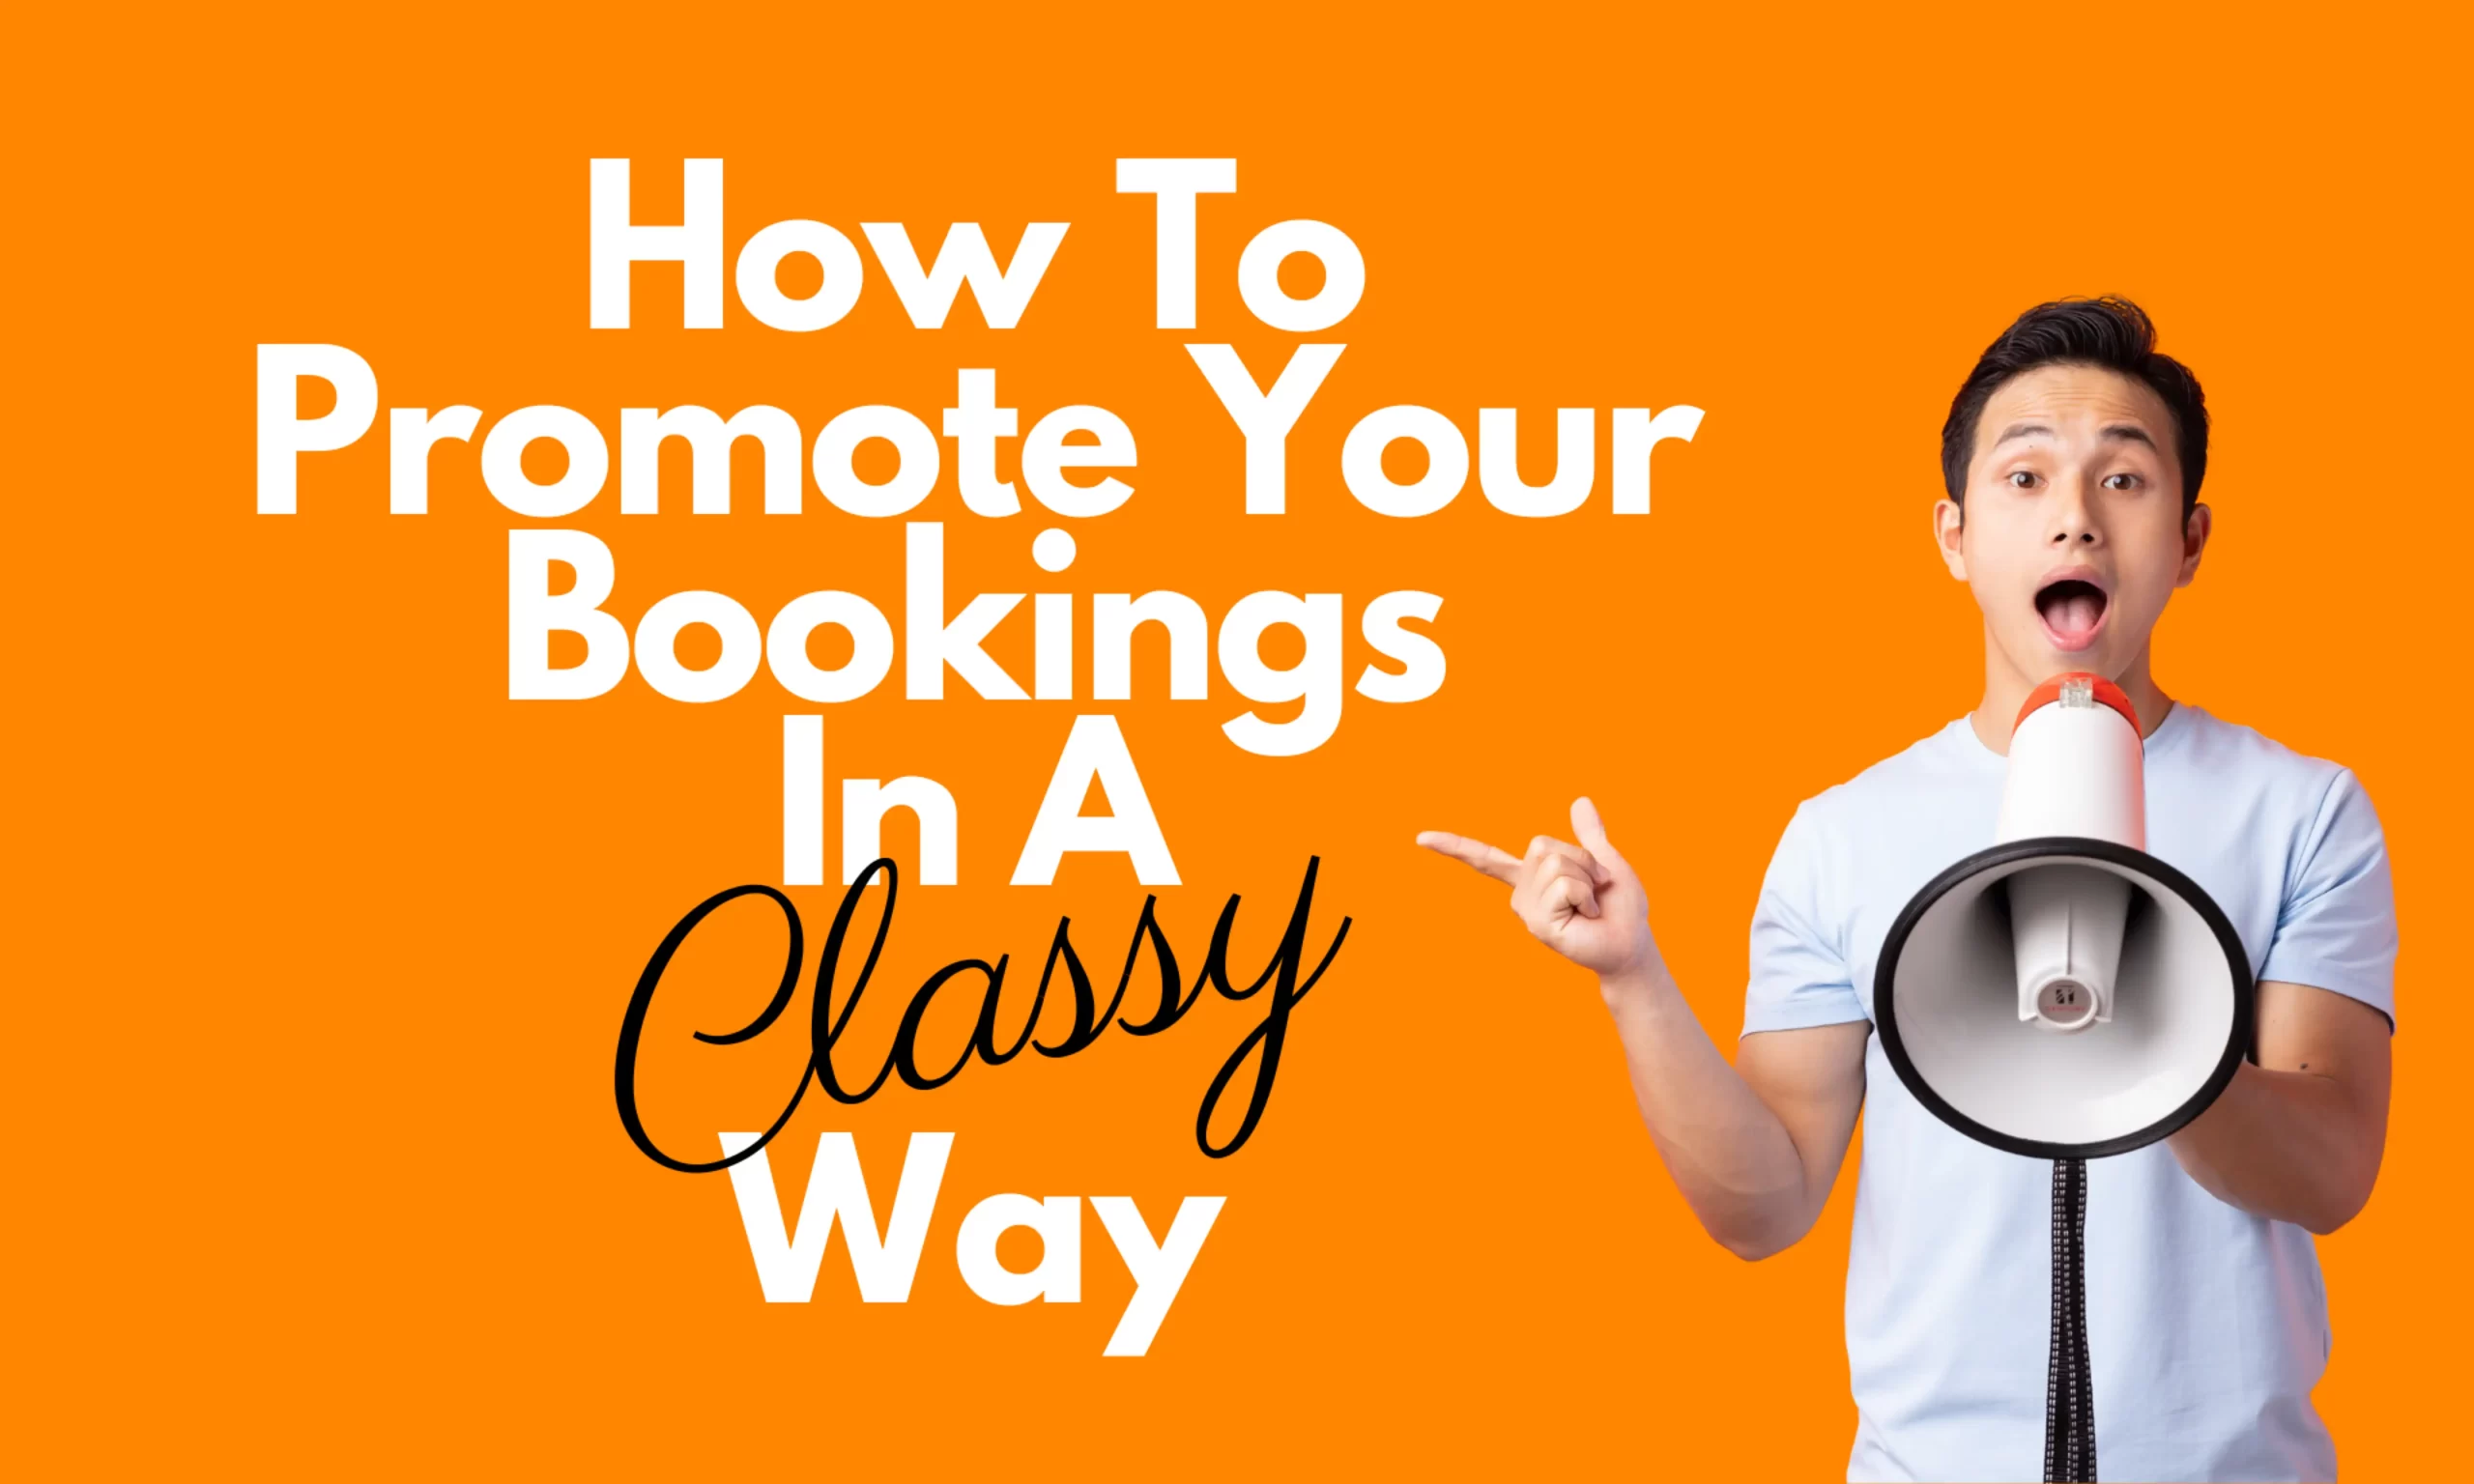 How To Promote Your Bookings In A Classy Way